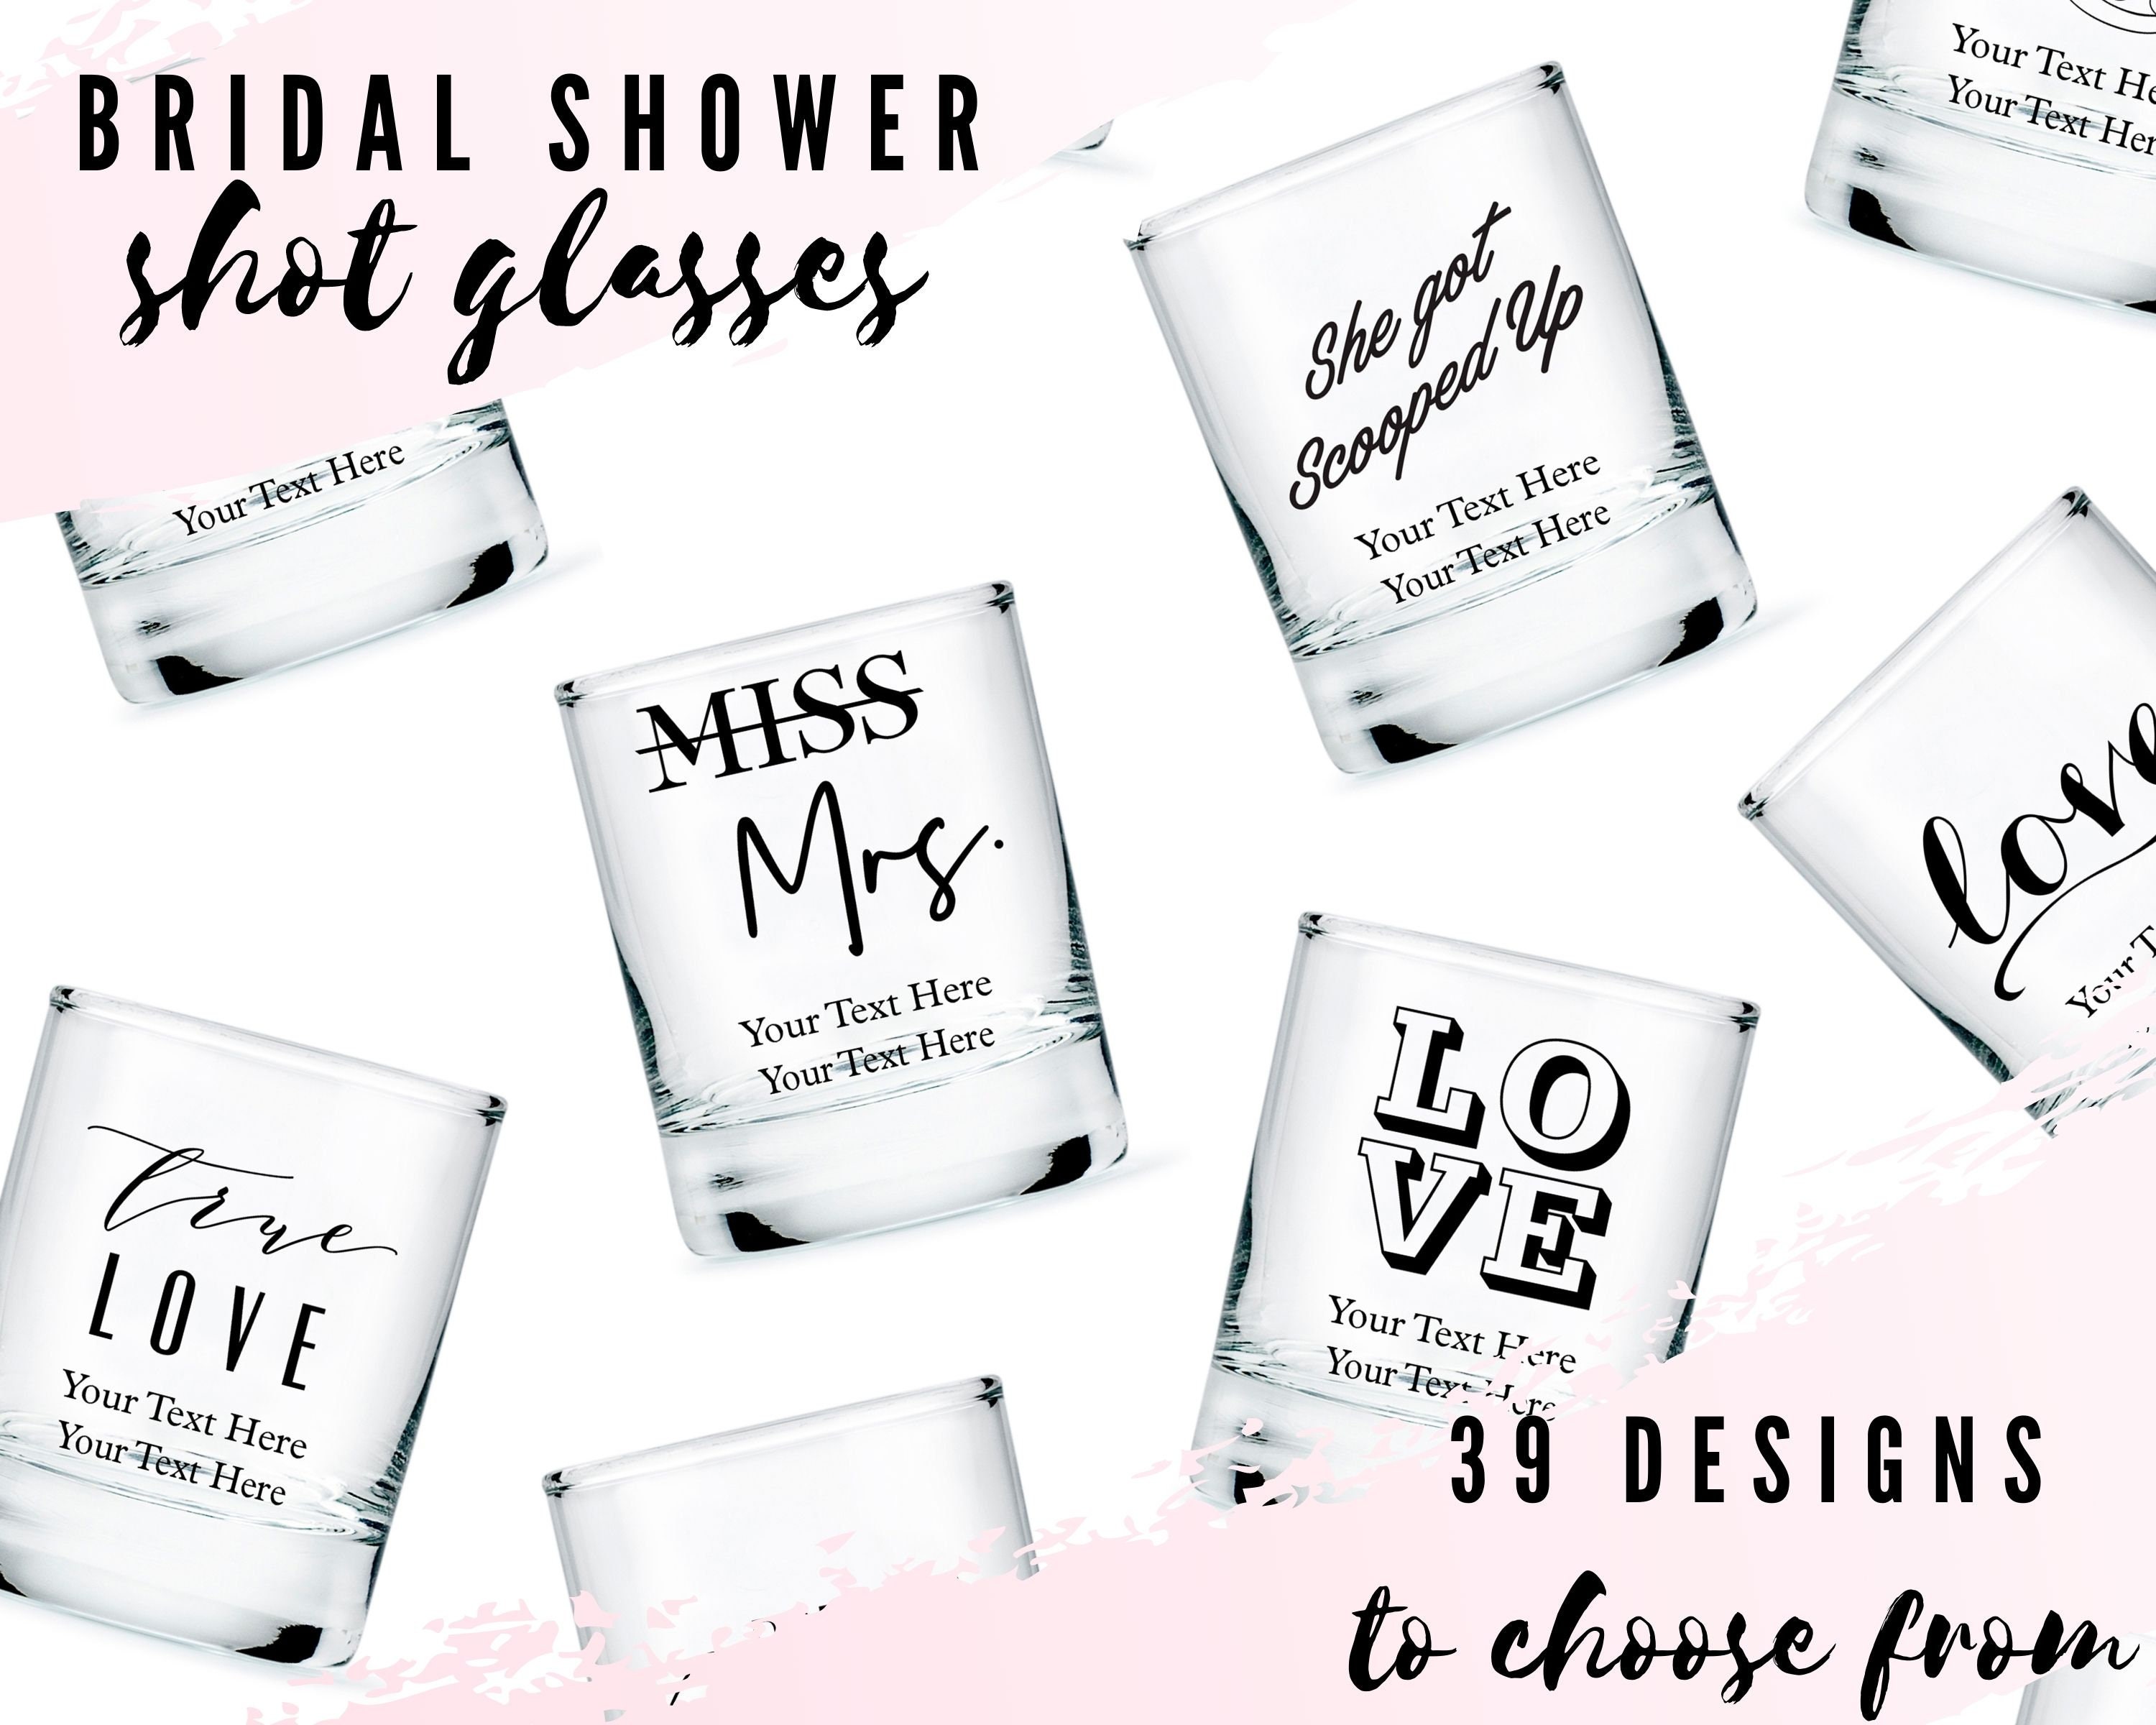 Custom Bridal Shower Large Stemless Wine Glasses 39 Designs to Choose From  Personalized Wine Glass Custom Bridal Shower Party Favor 